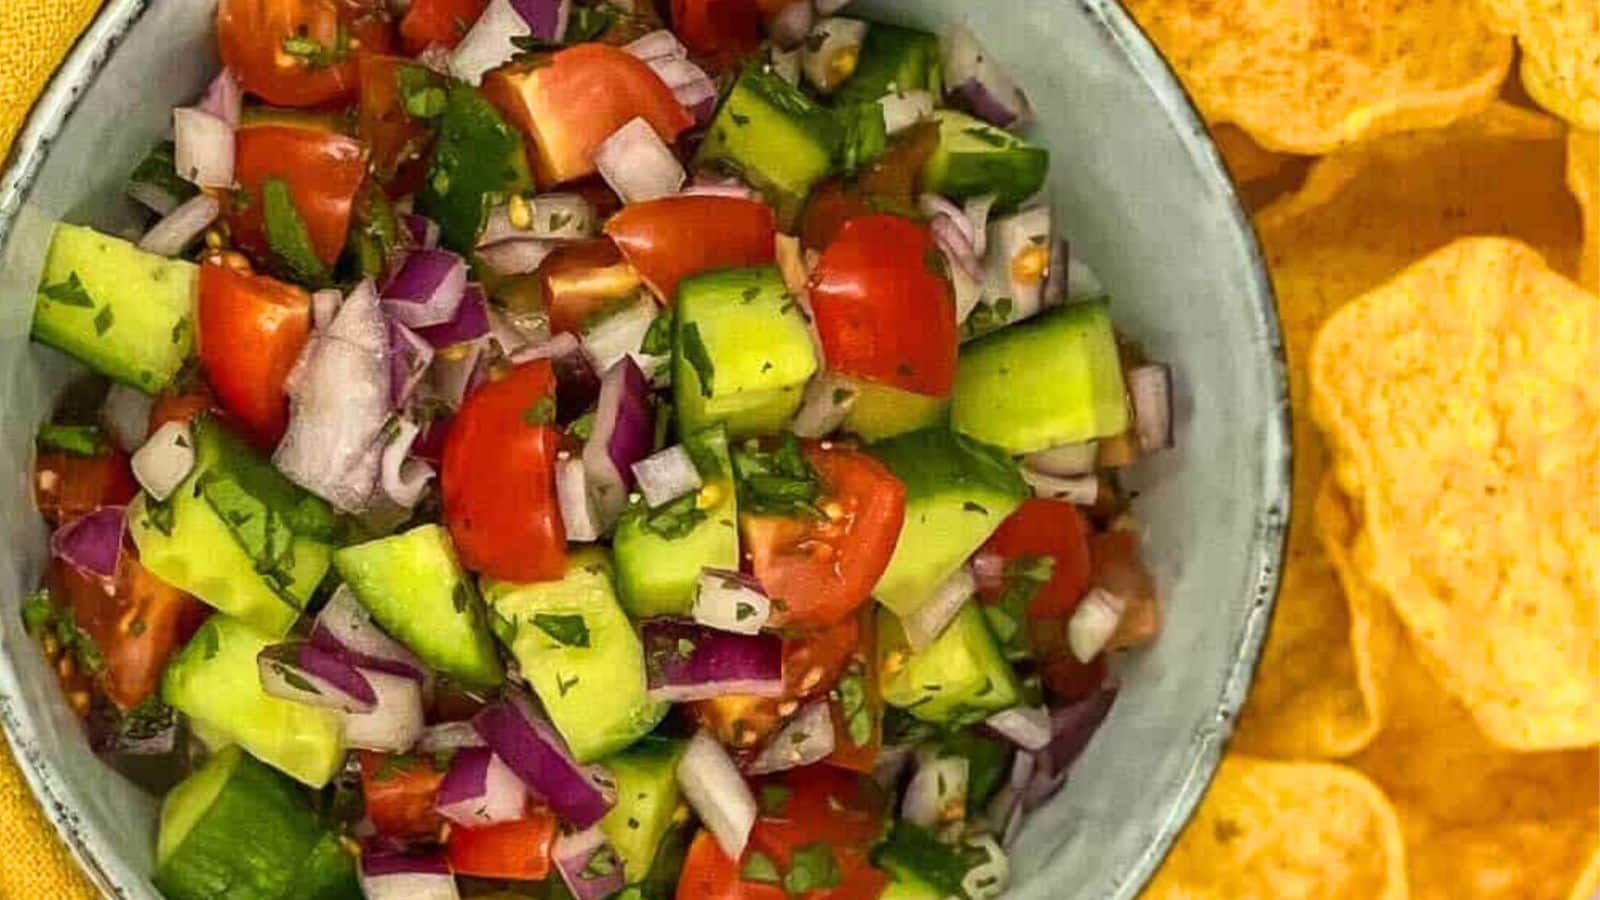 <p>Nothing screams fresh like a Tomato, Cucumber, and Onion Salad! It’s like having your very own mini garden right on your plate. Best of all, it’s an easy-peasy recipe, ready to refresh your meals in a flash!<br><strong>Get the Recipe: </strong><a href="https://www.splashoftaste.com/tomato-onion-and-cucumber-salad/?utm_source=msn&utm_medium=page&utm_campaign=msn">Tomato, Cucumber, and Onion Salad</a></p>